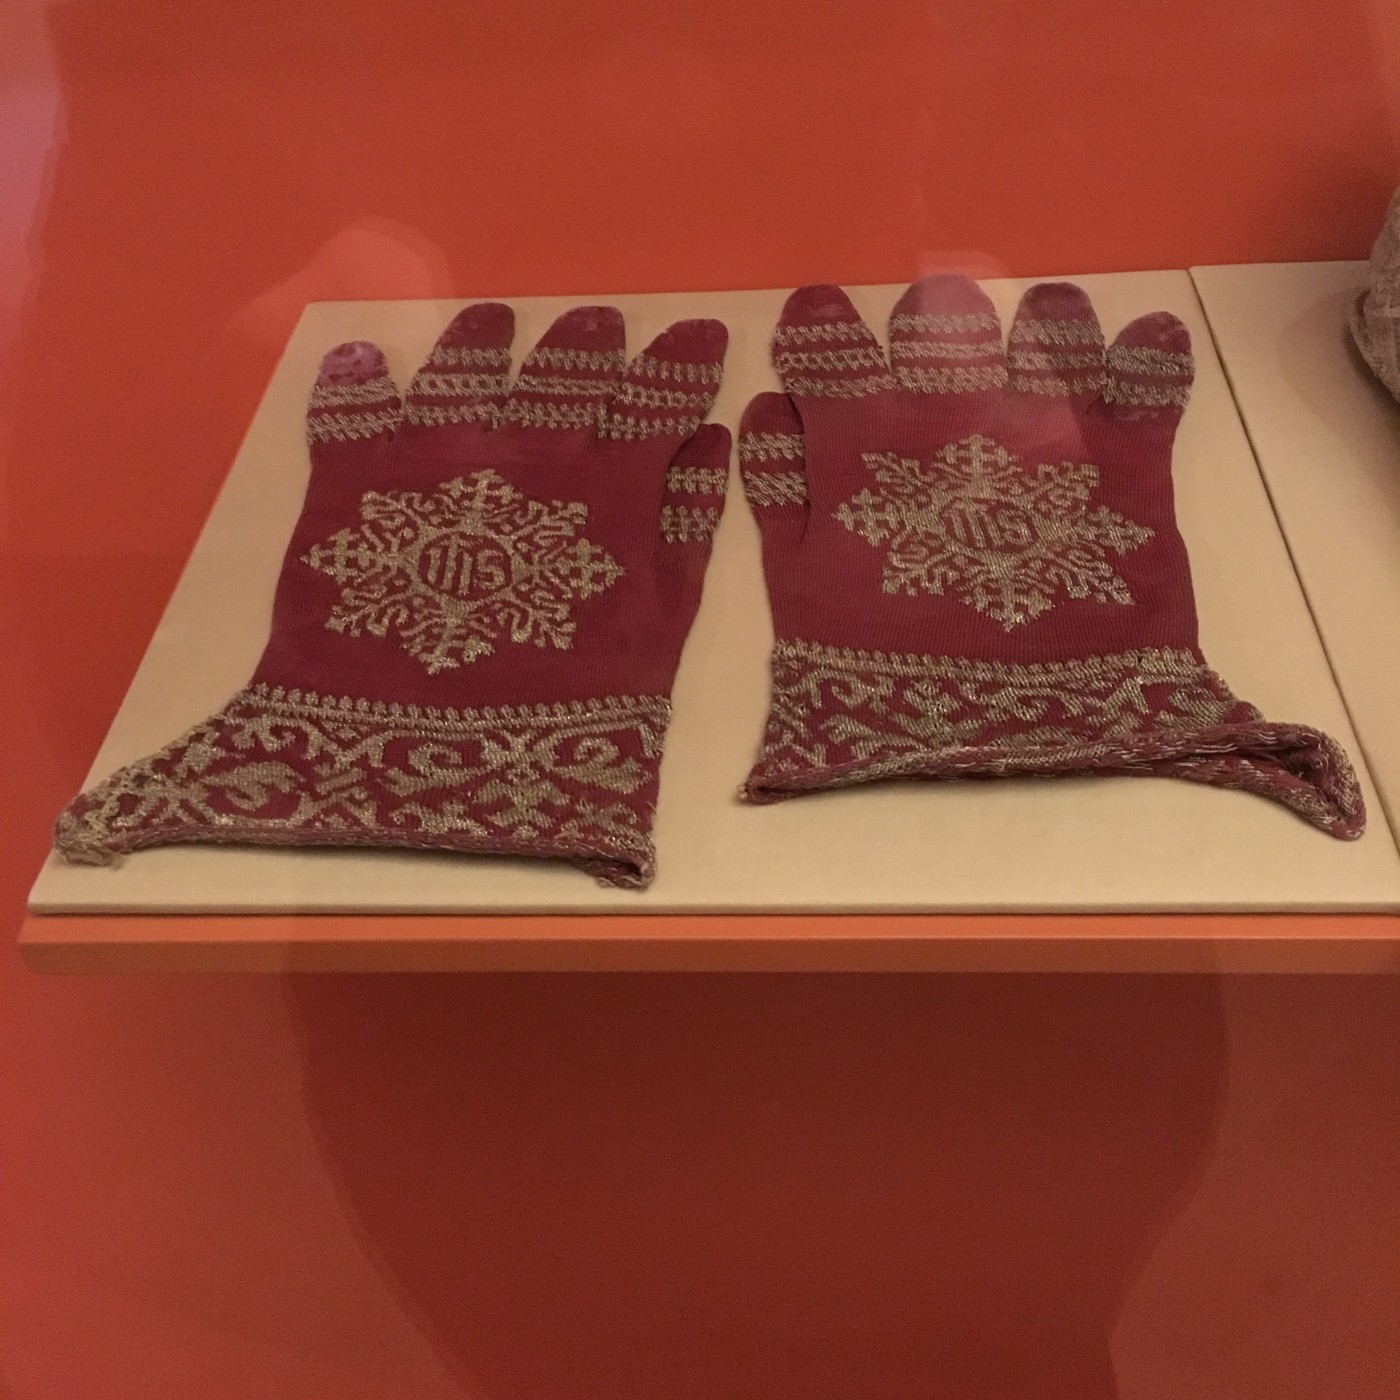 Image 1. Liturgical gloves from the treasury of the cathedral of St Bertrand de Comminges, France (inventory number 58-P-726); image: Dr Angharad Thomas (https://kemeresearch.com/gloves/18) 